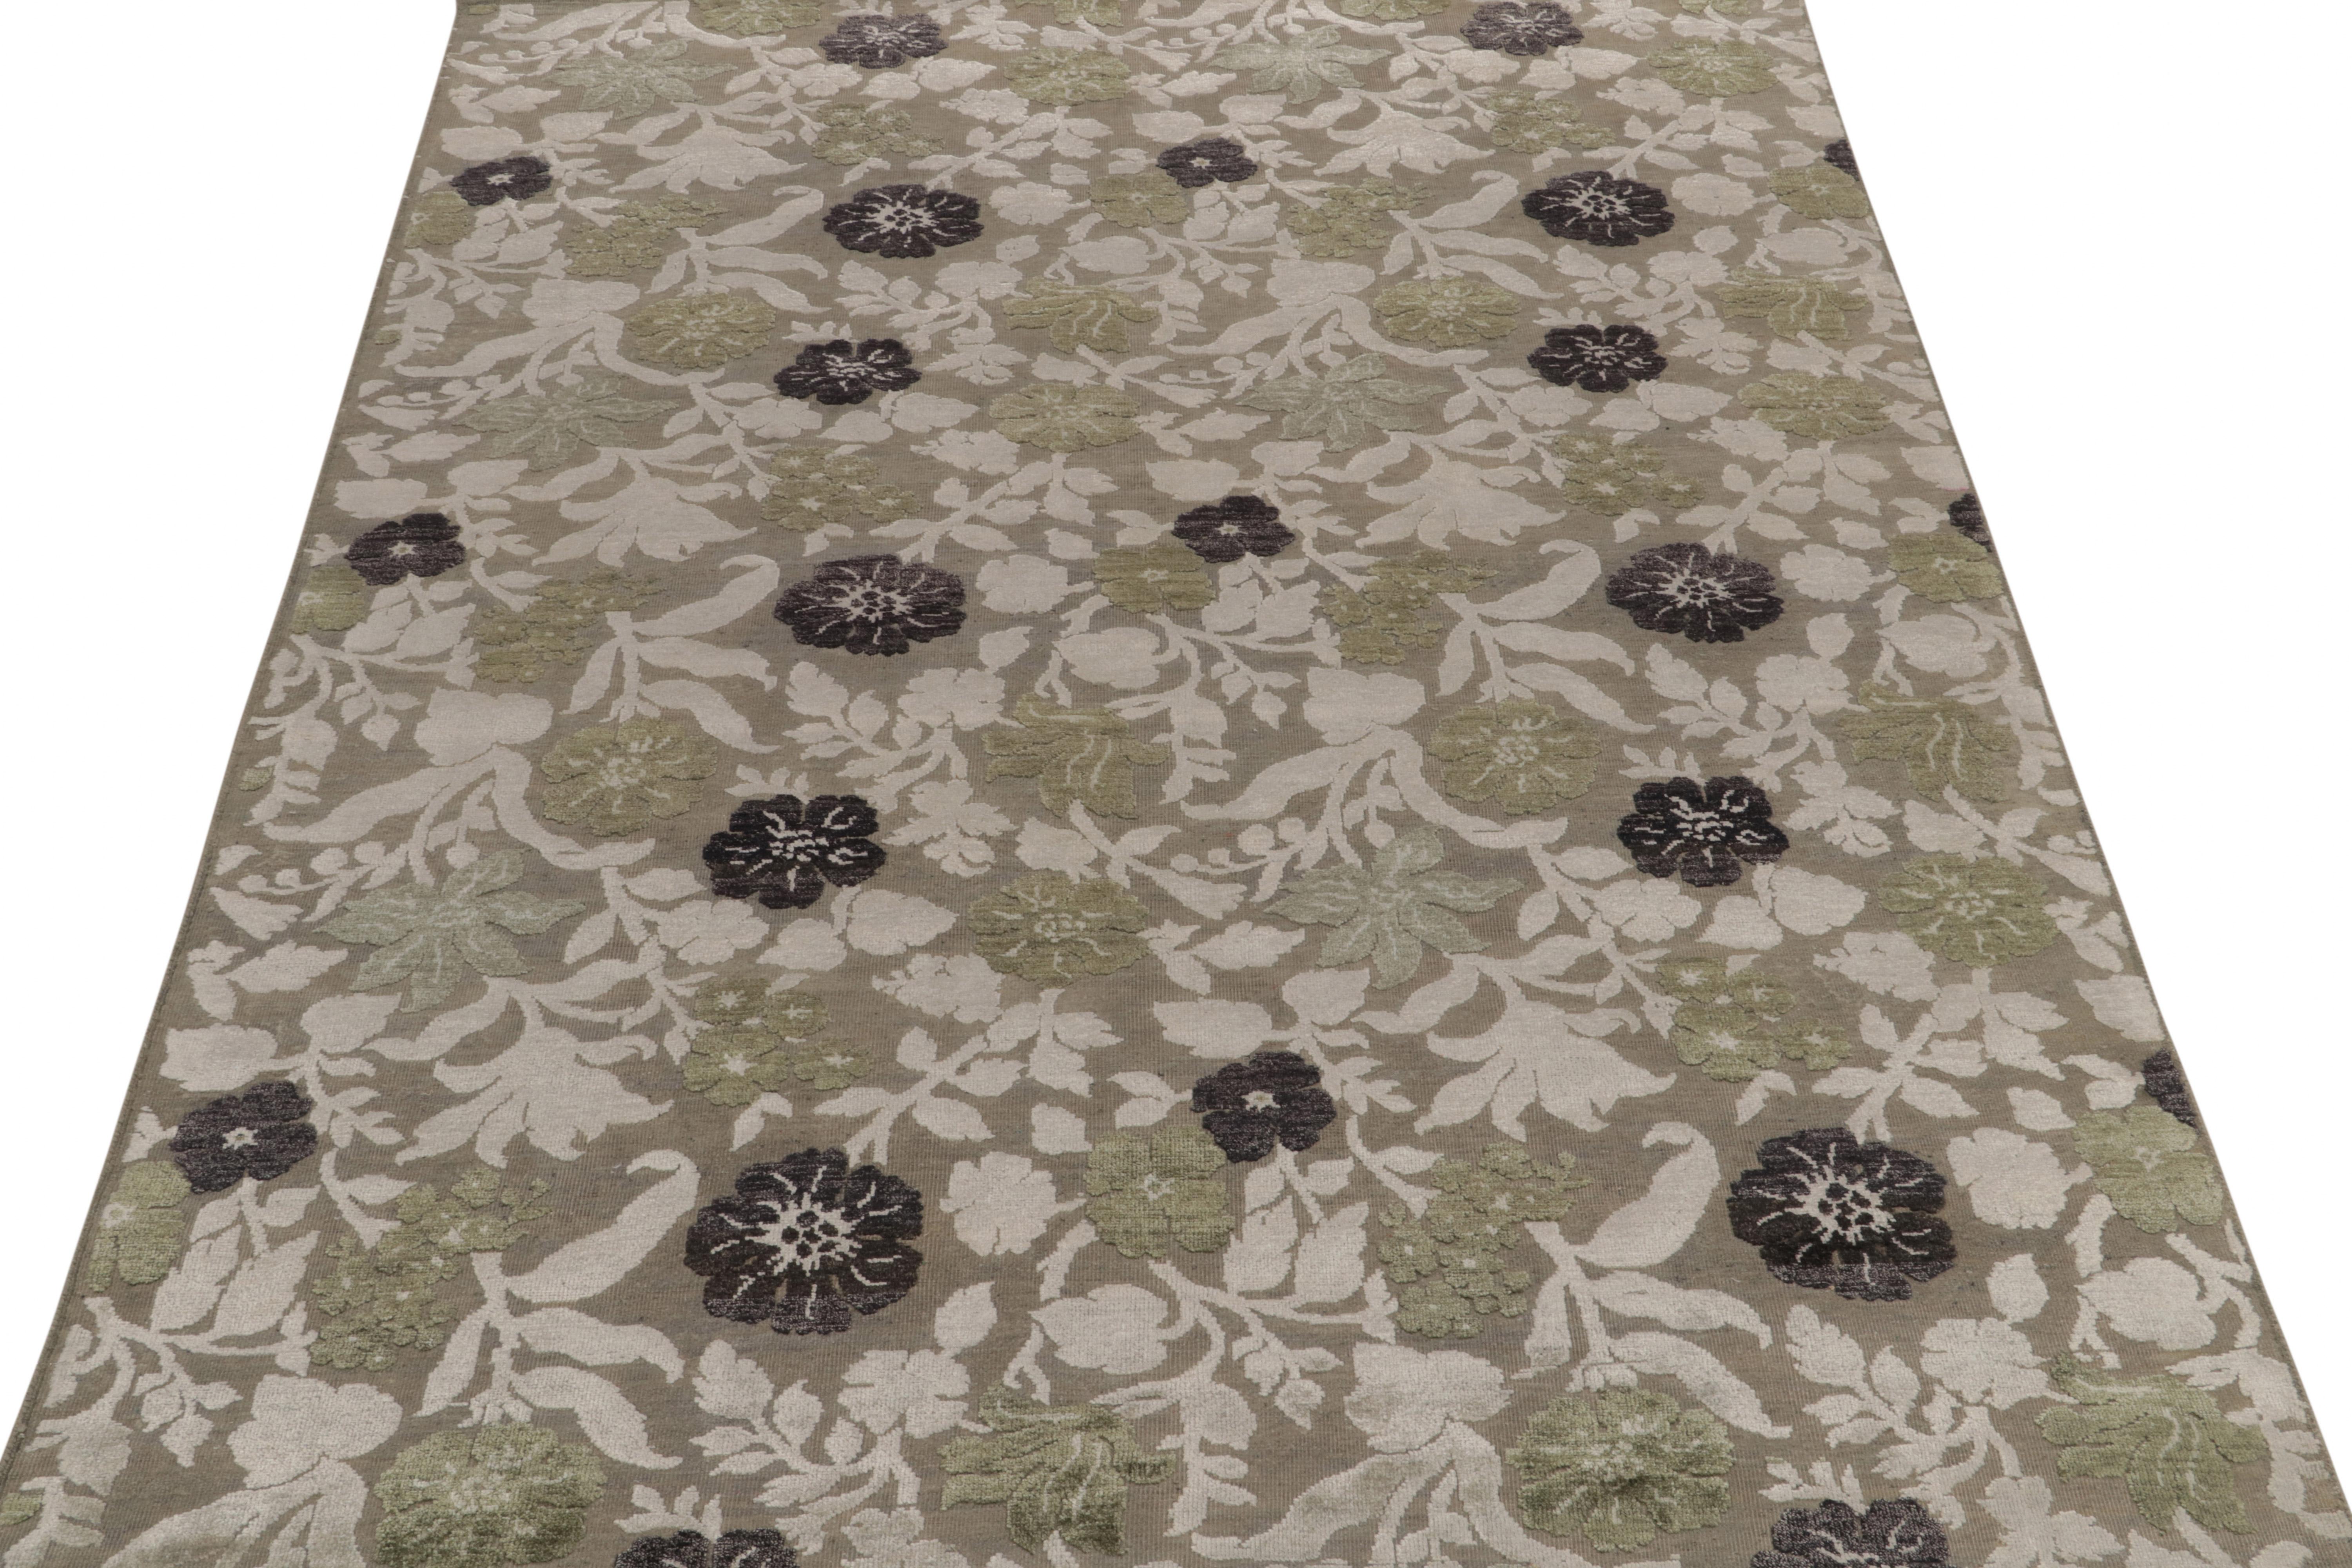 Modern Rug & Kilim’s Contemporary Rug in Beige-Brown, Black and Green Floral Patterns For Sale